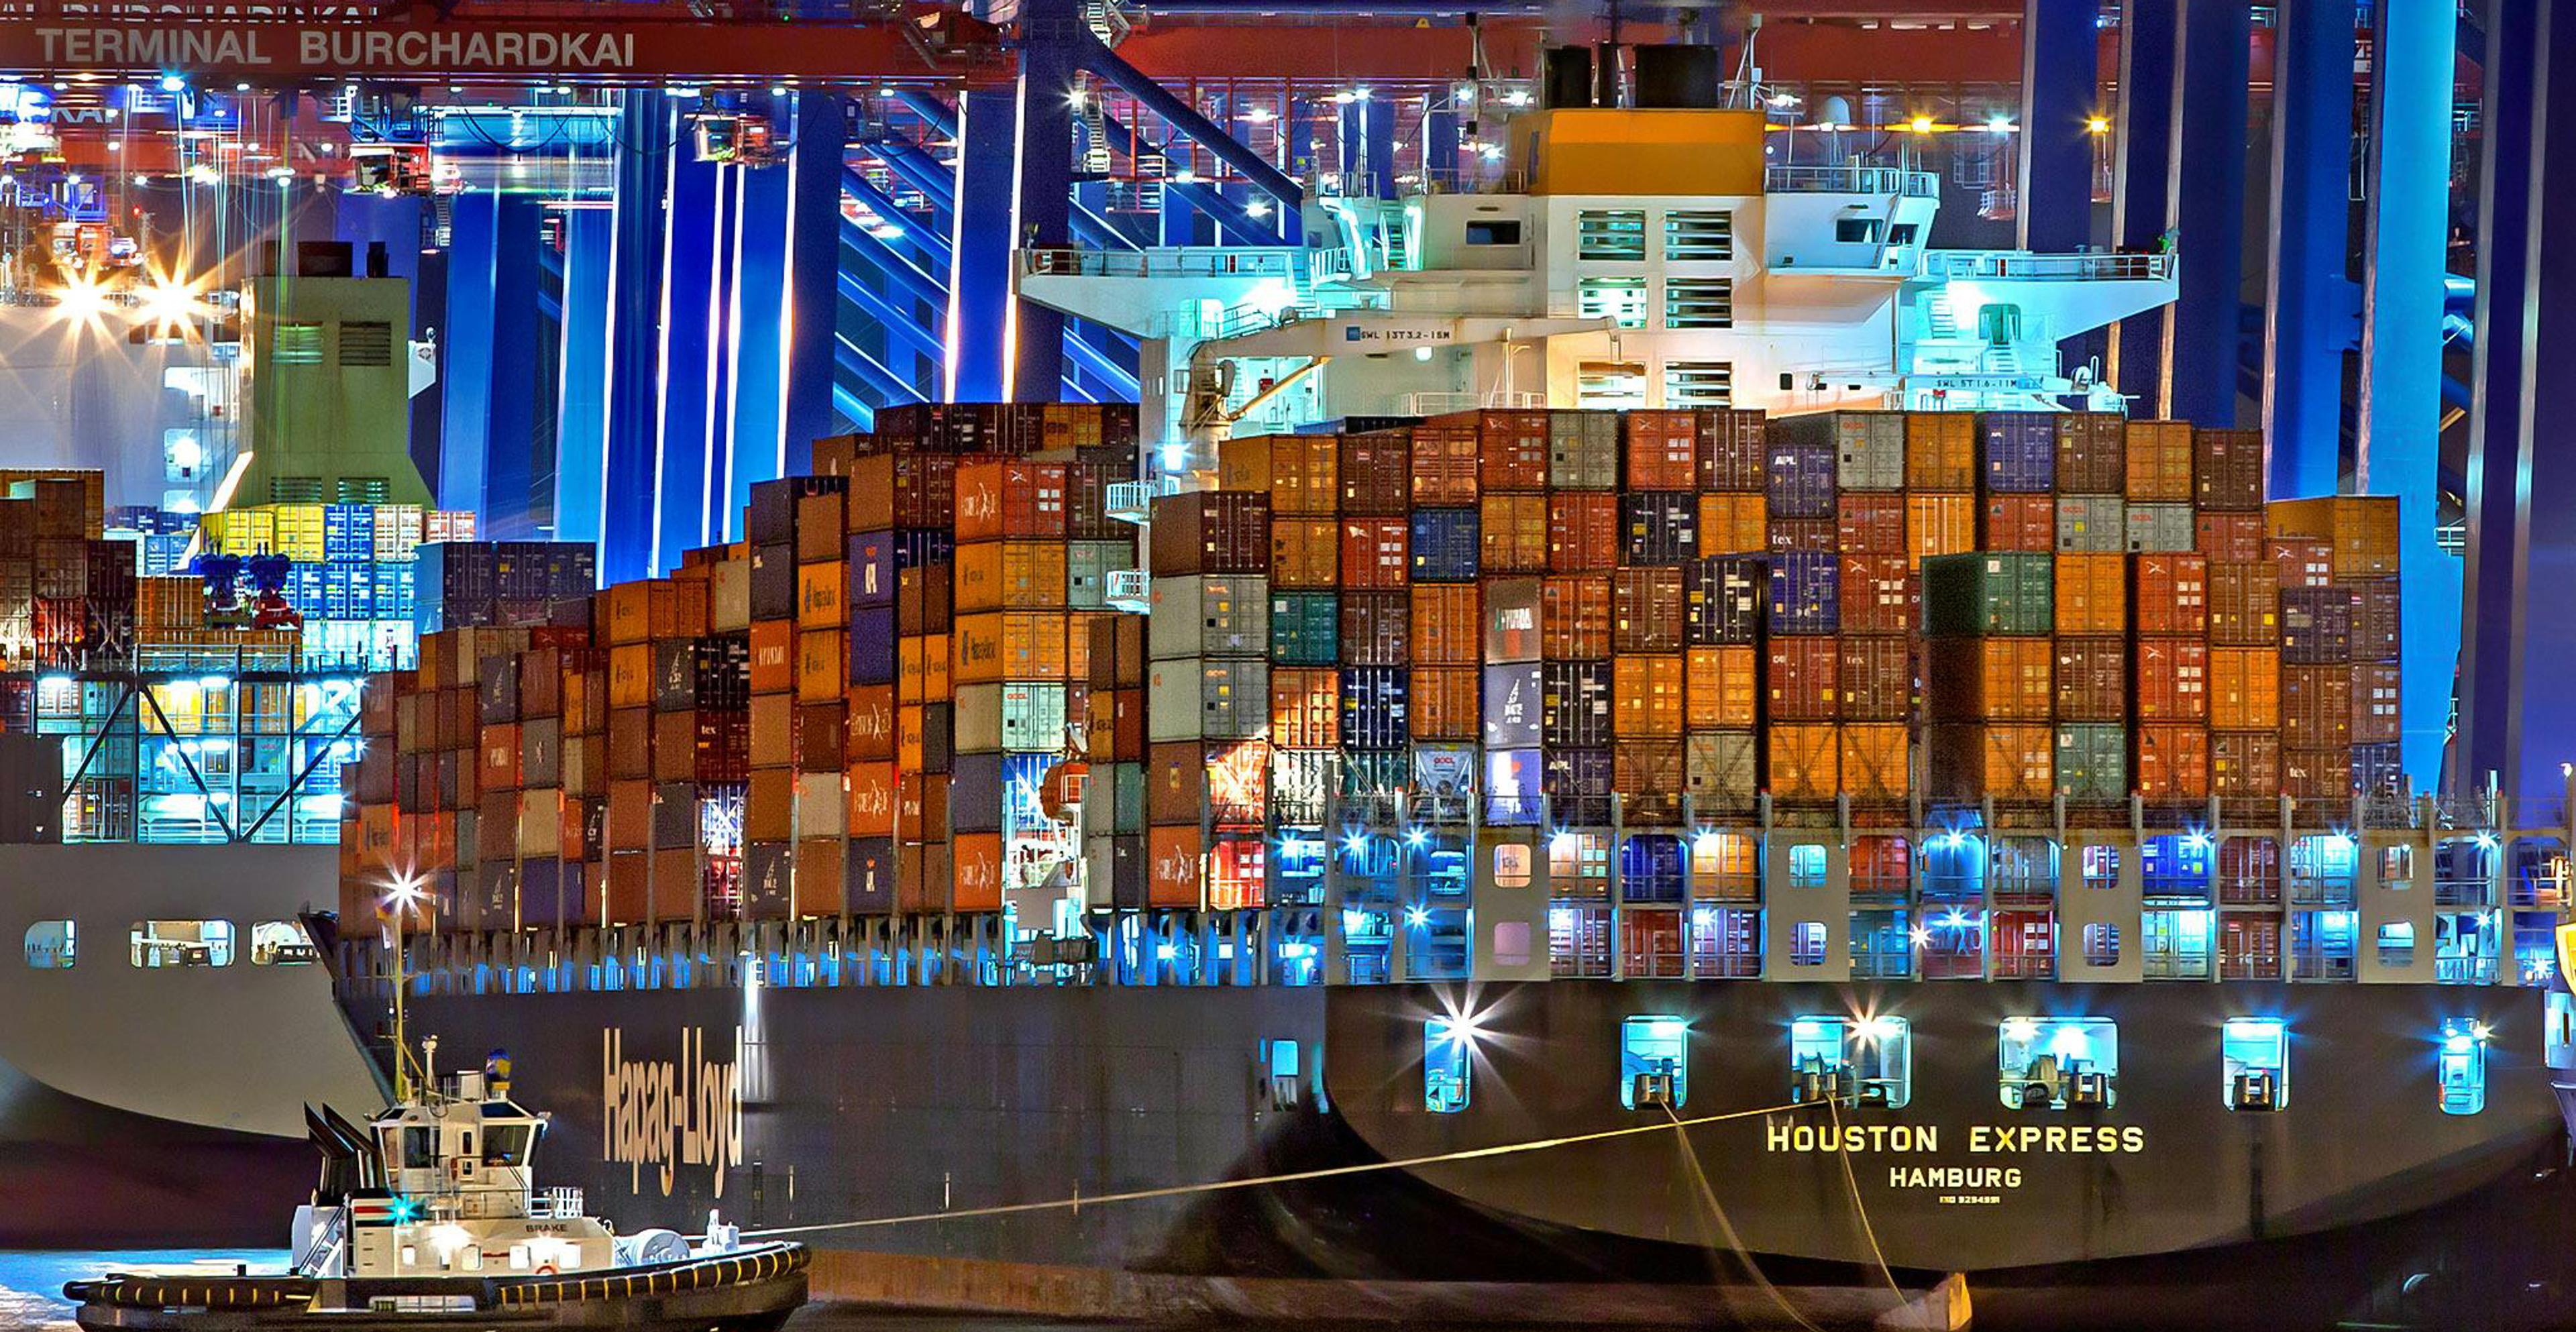 rear shot of loaded ship preparing to leave port at night